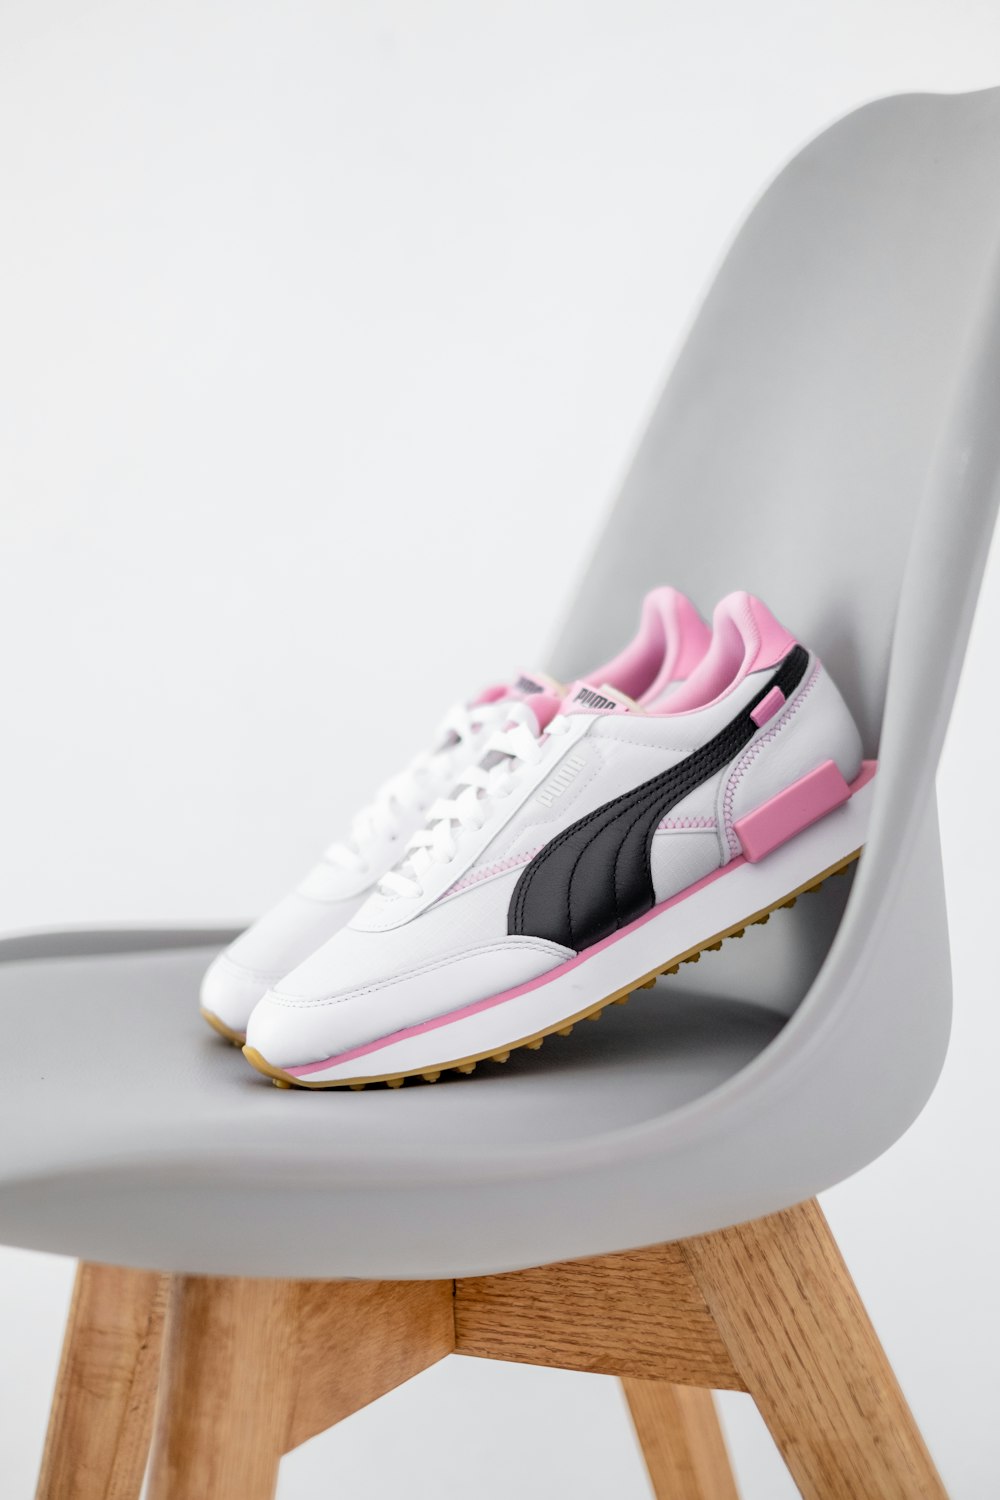 Puma Shoes Pictures | Download Free Images on Unsplash